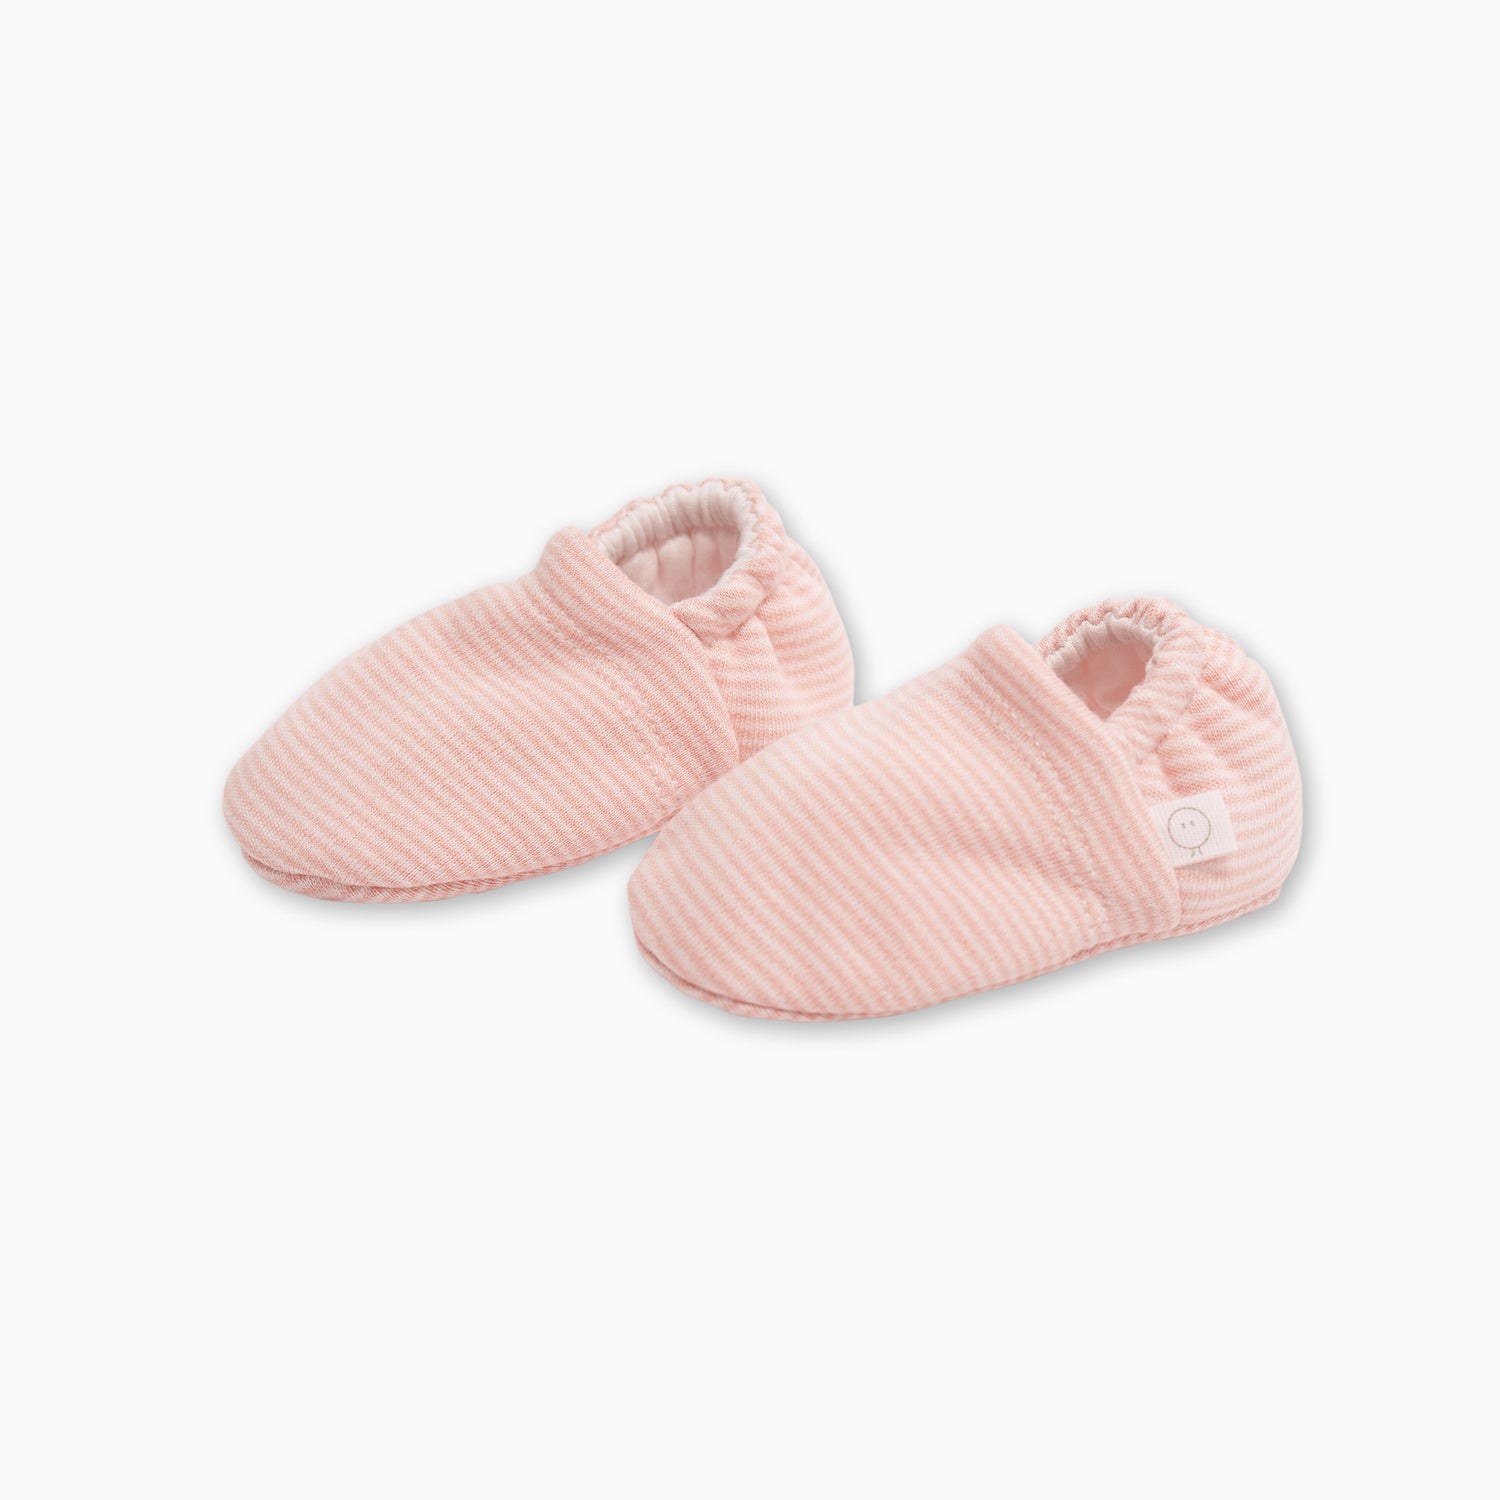 Baby booties in blush stripe